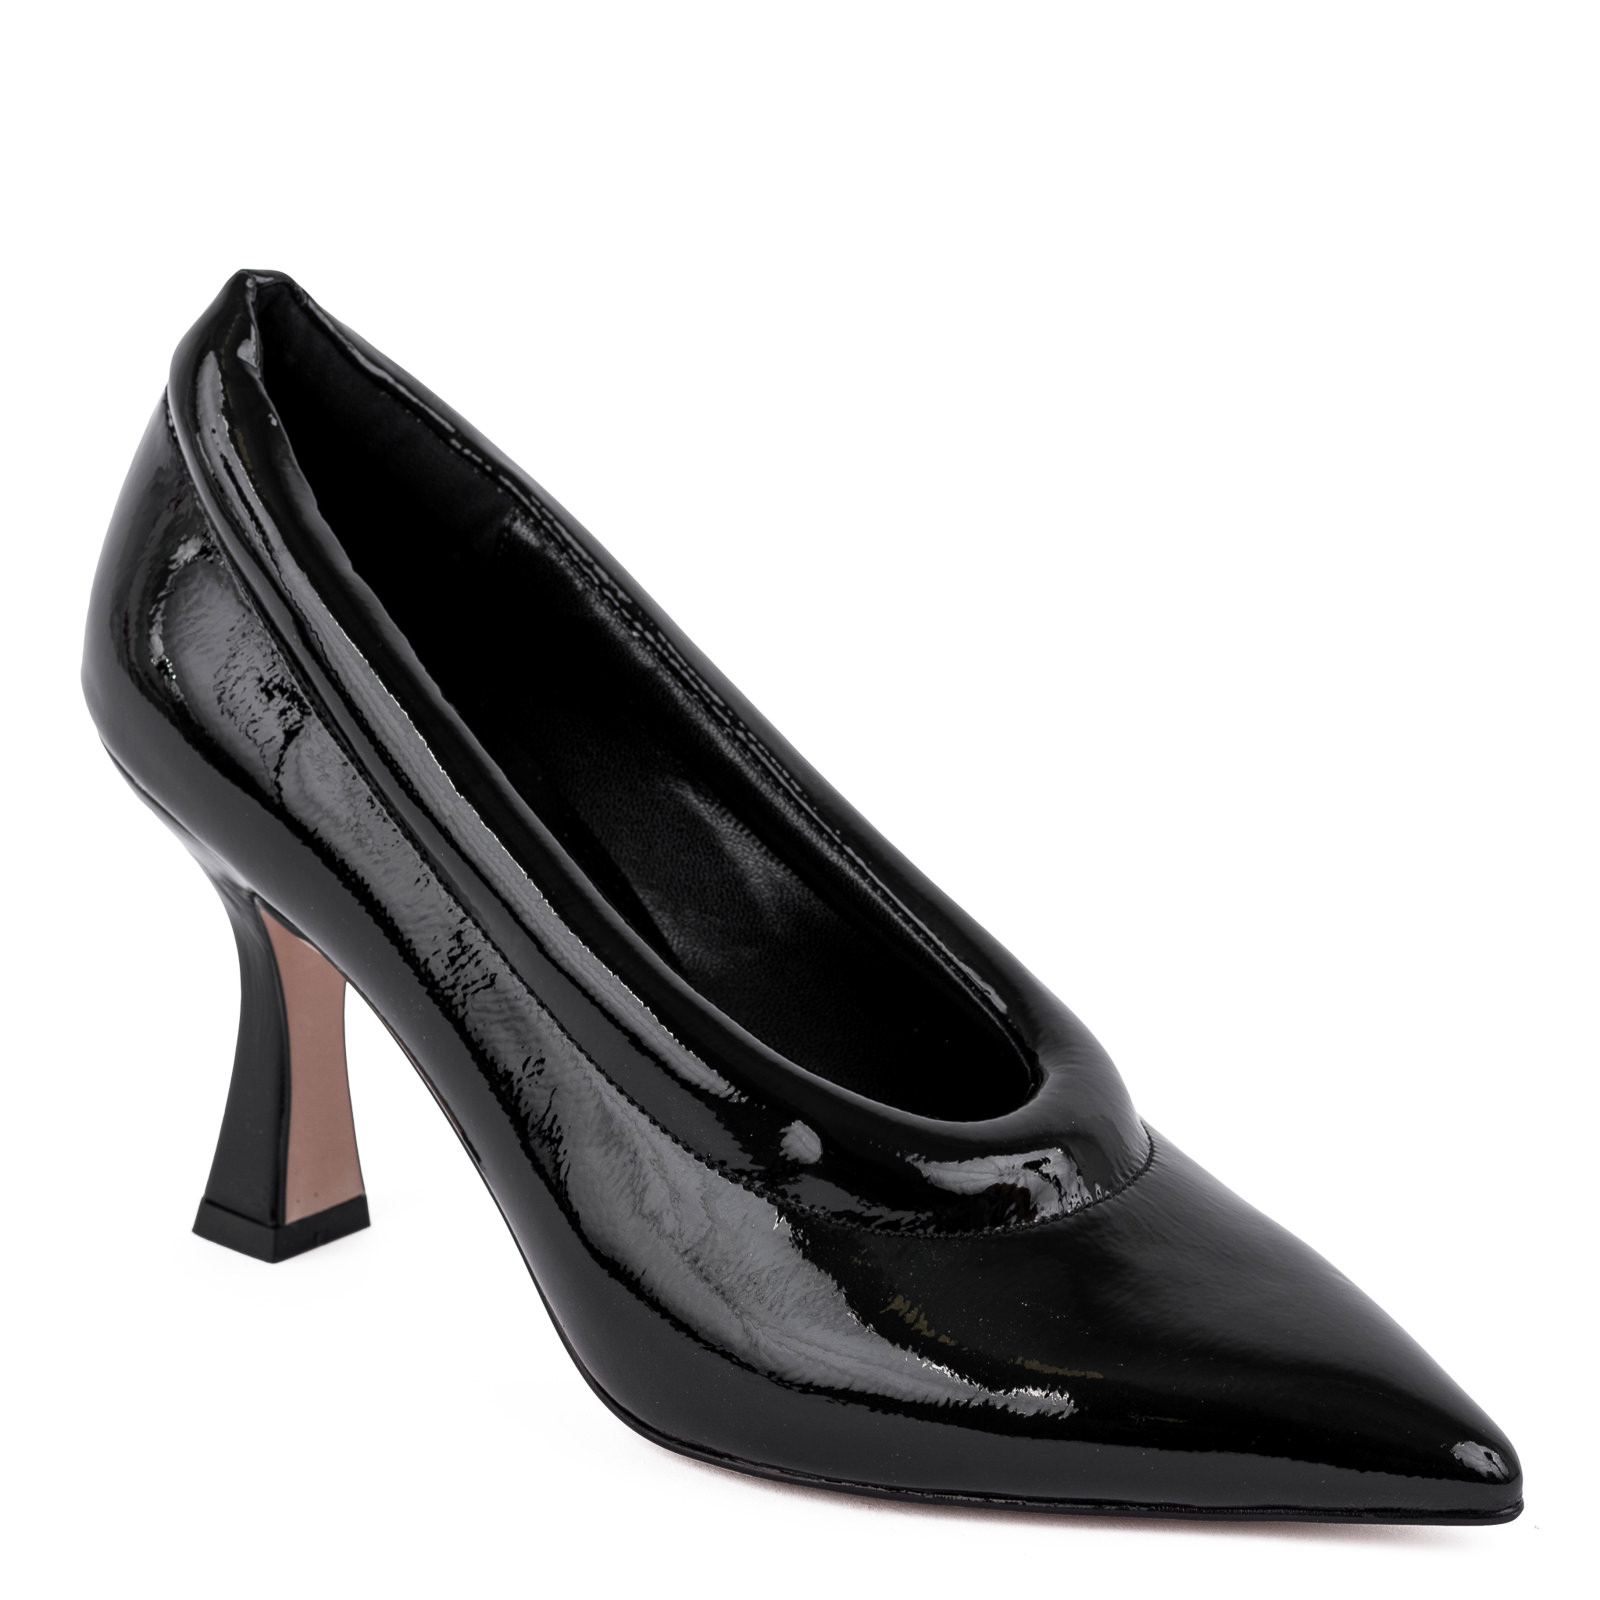 PATENT POINTED STILLETO SHOES WITH THIN HEEL - BLACK